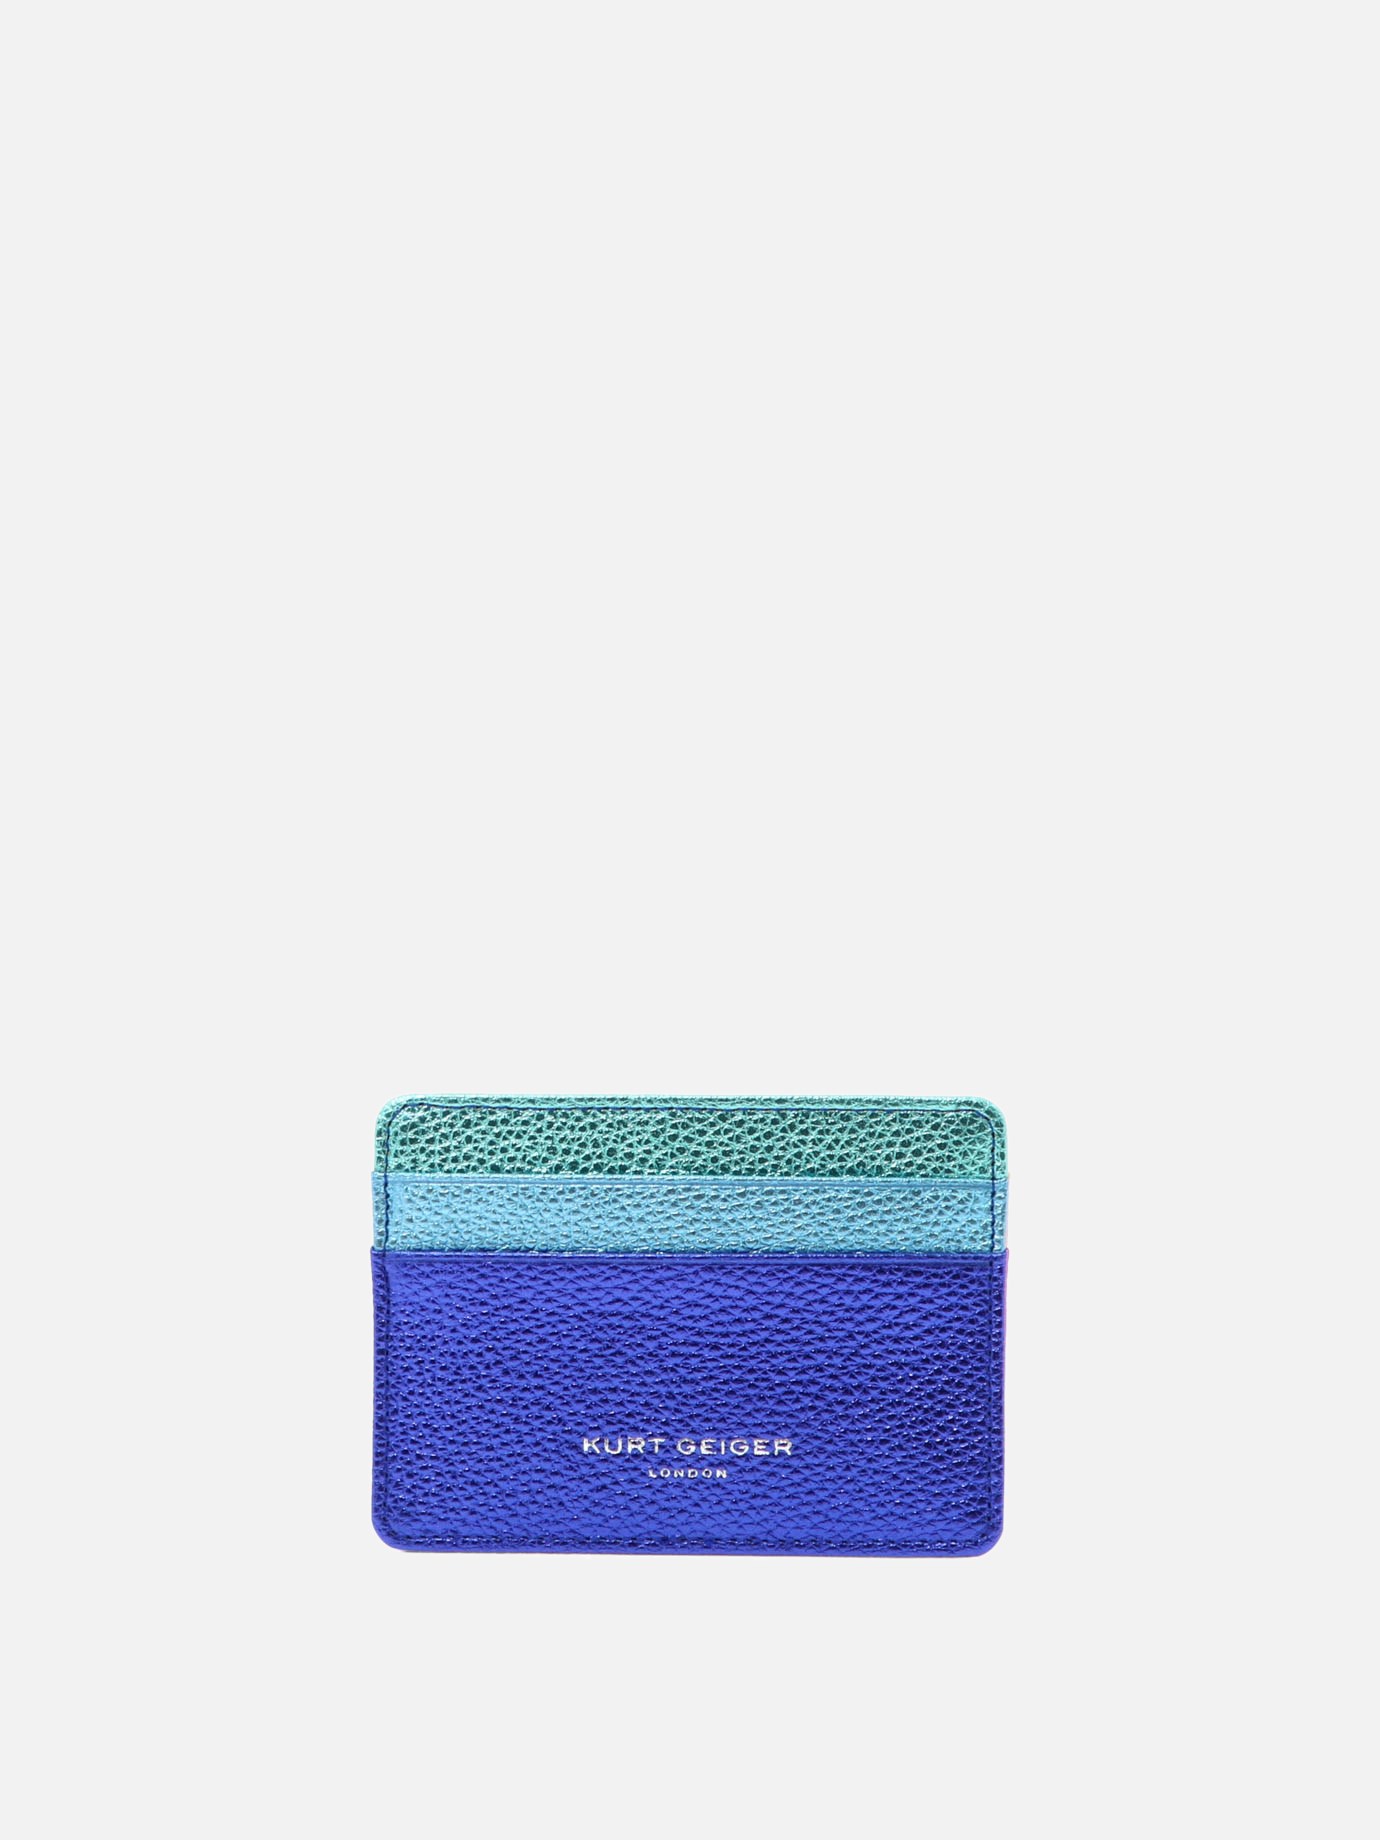 Grained leather card holder